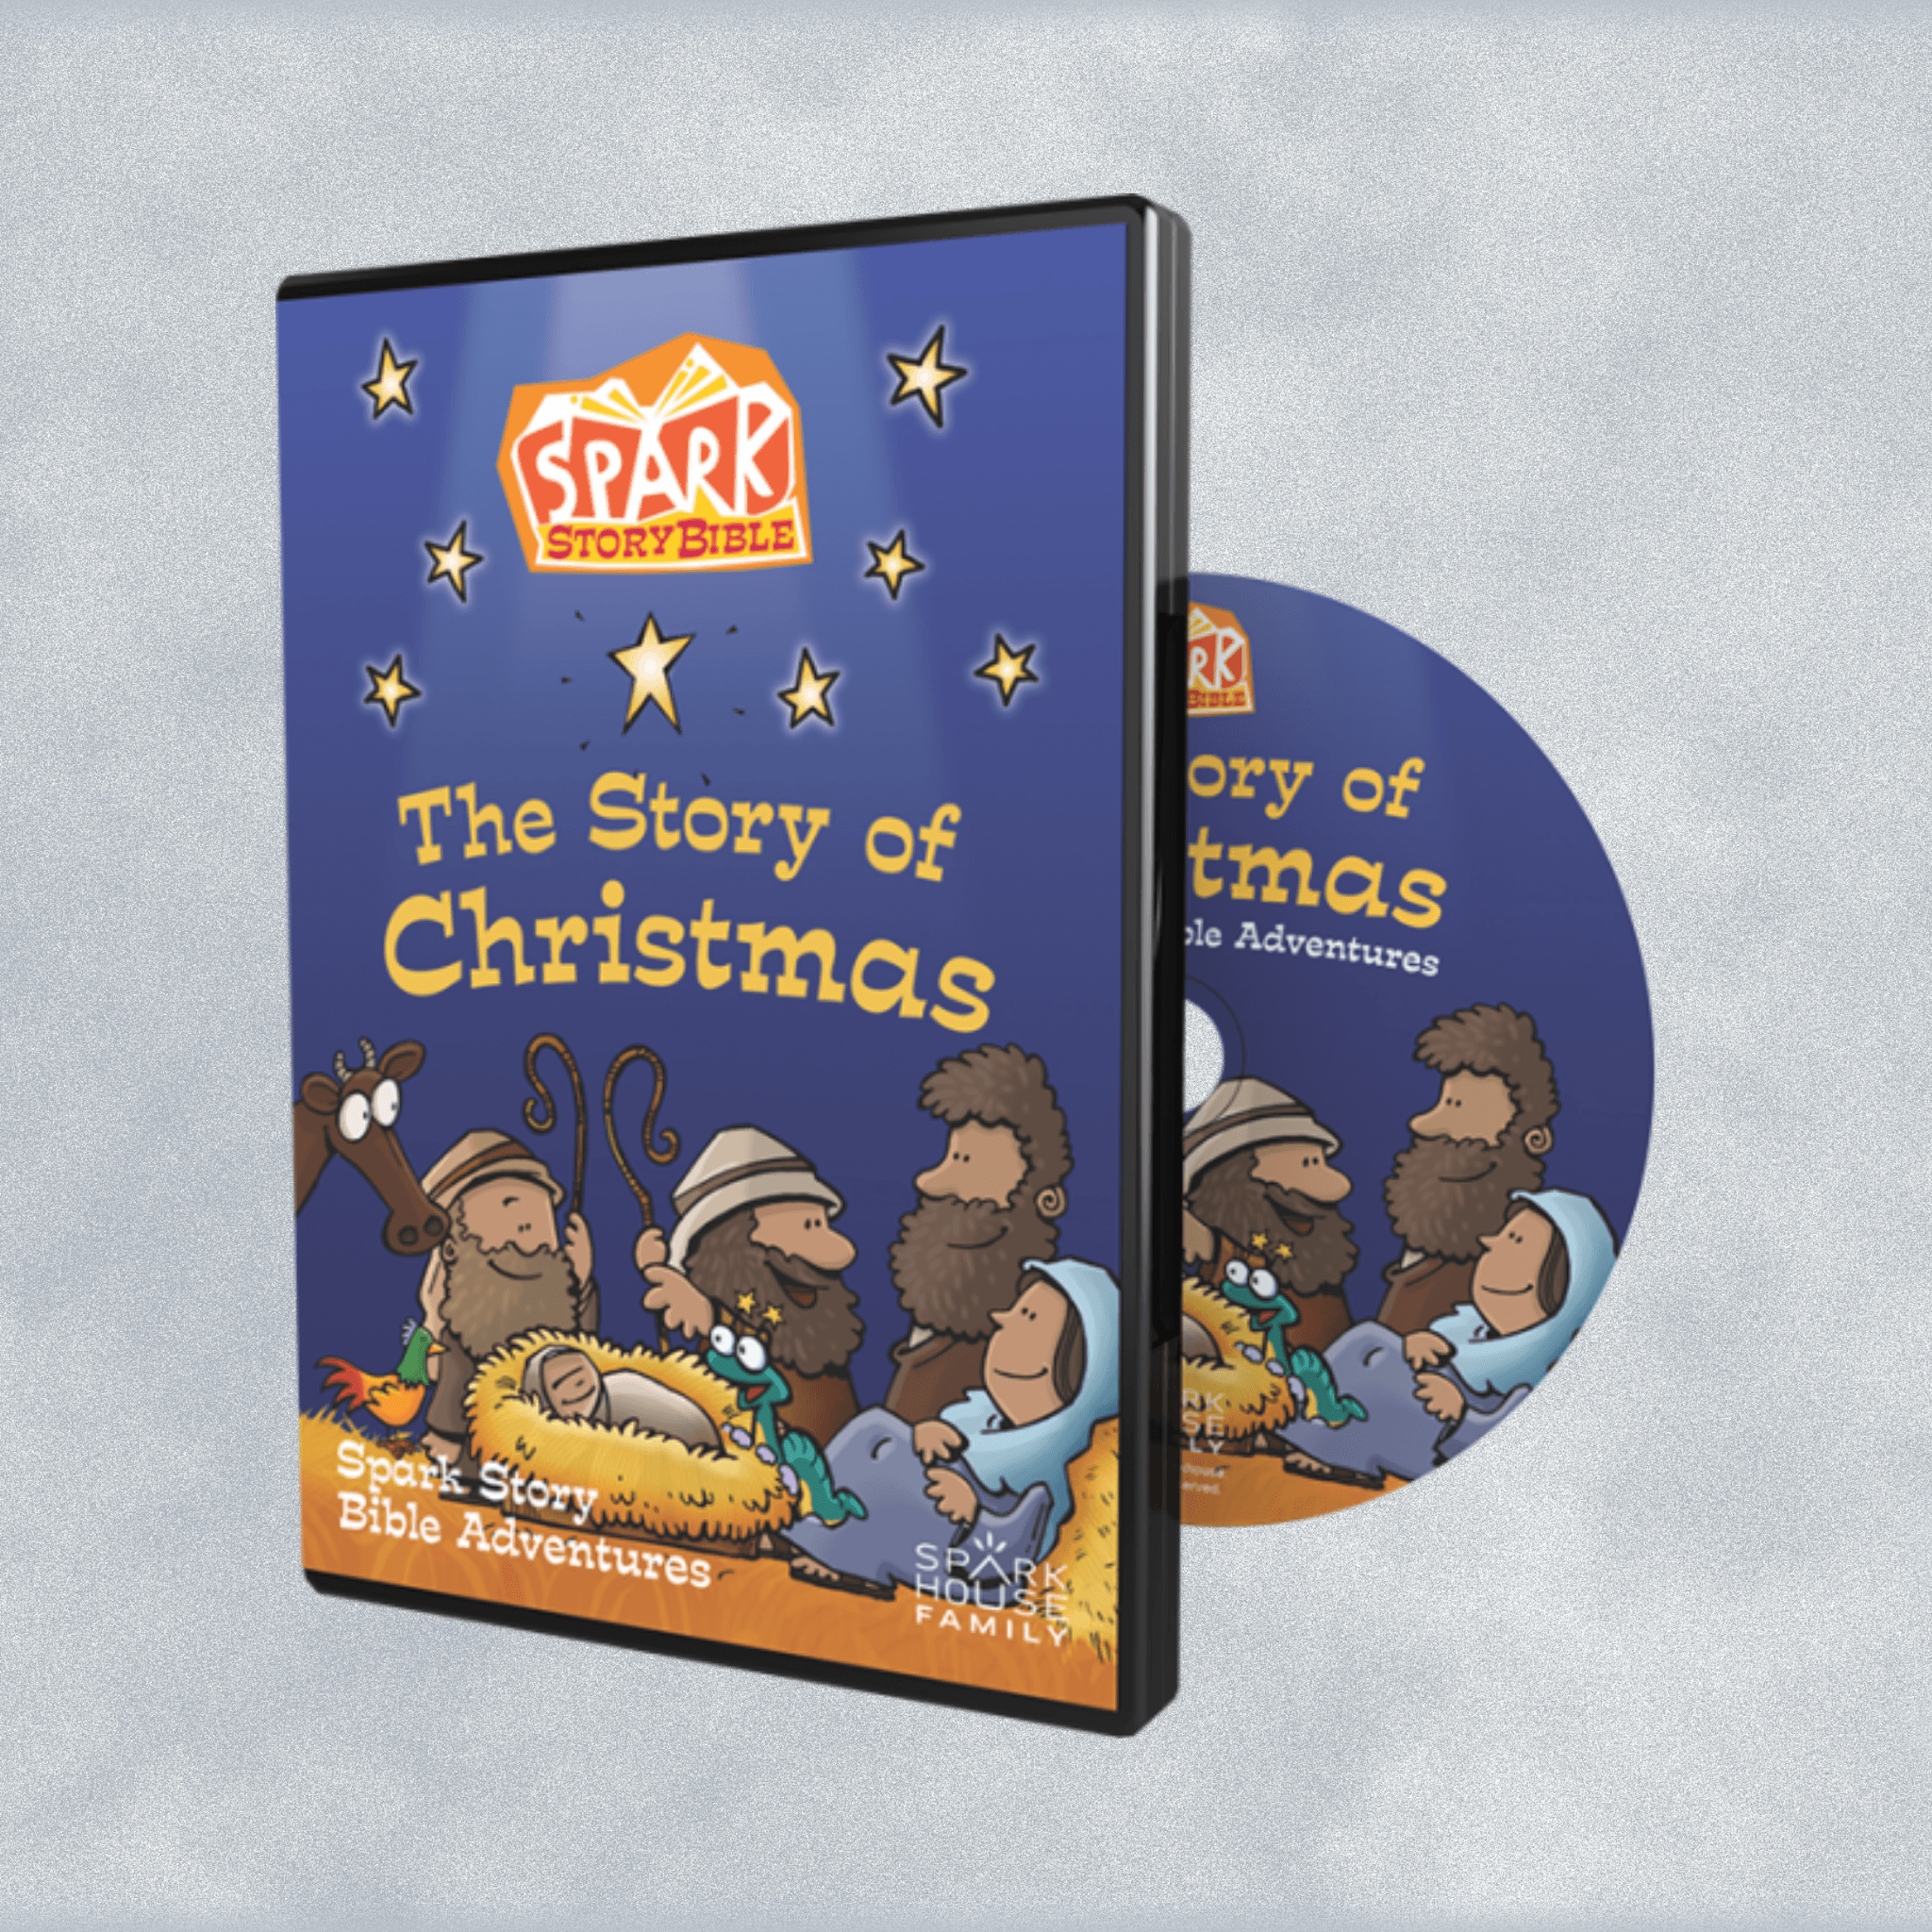 The Story of Christmas DVD - A Spark Story Bible